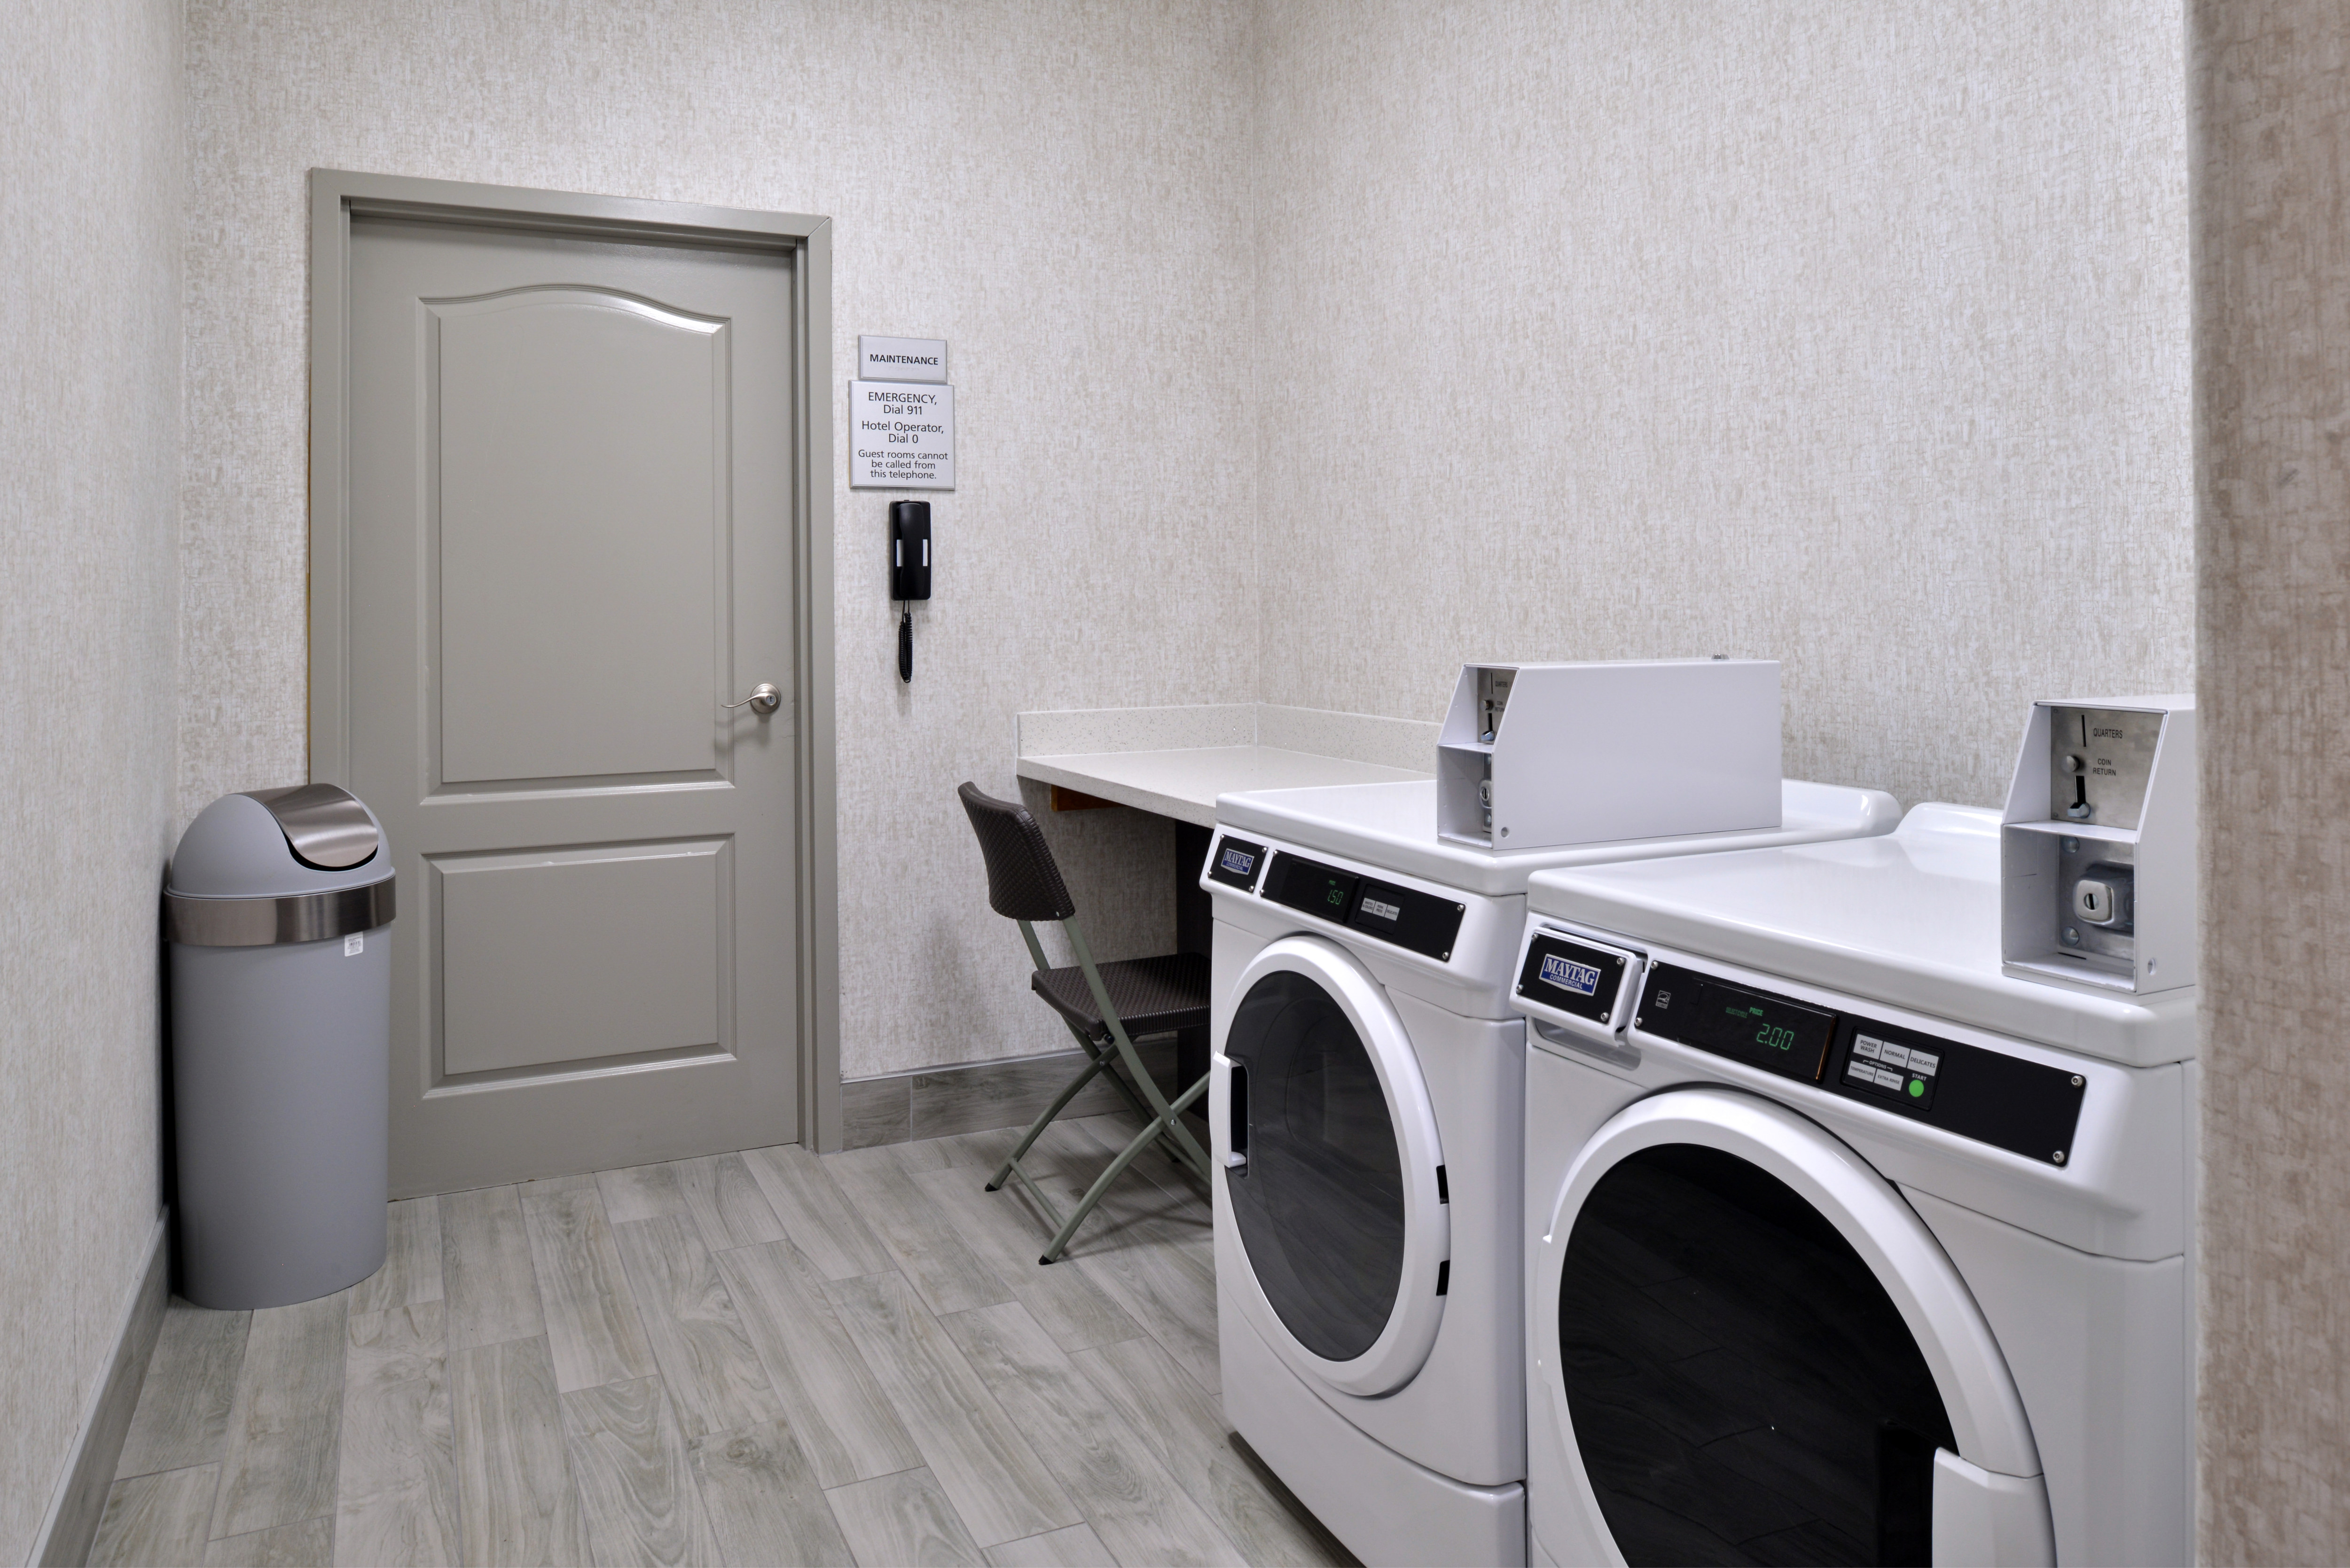 Laundry room with machines, table and chair